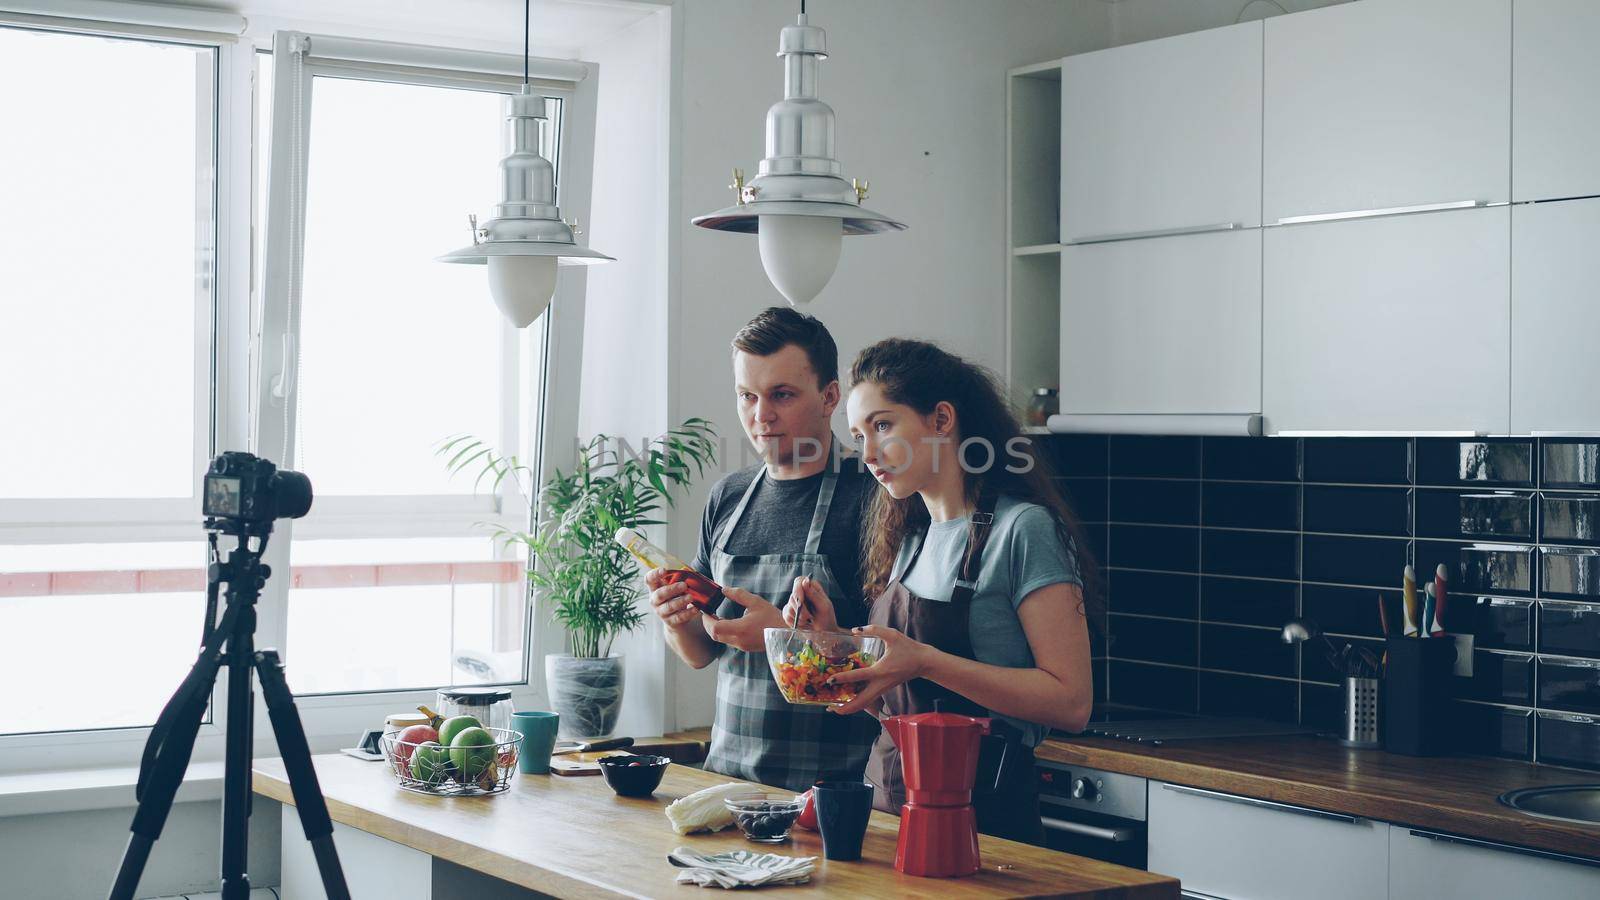 Smiling attractive couple recording video food vlog about cooking haelthy salad on digital camera in the kitchen at home. Vlogging and social media concept